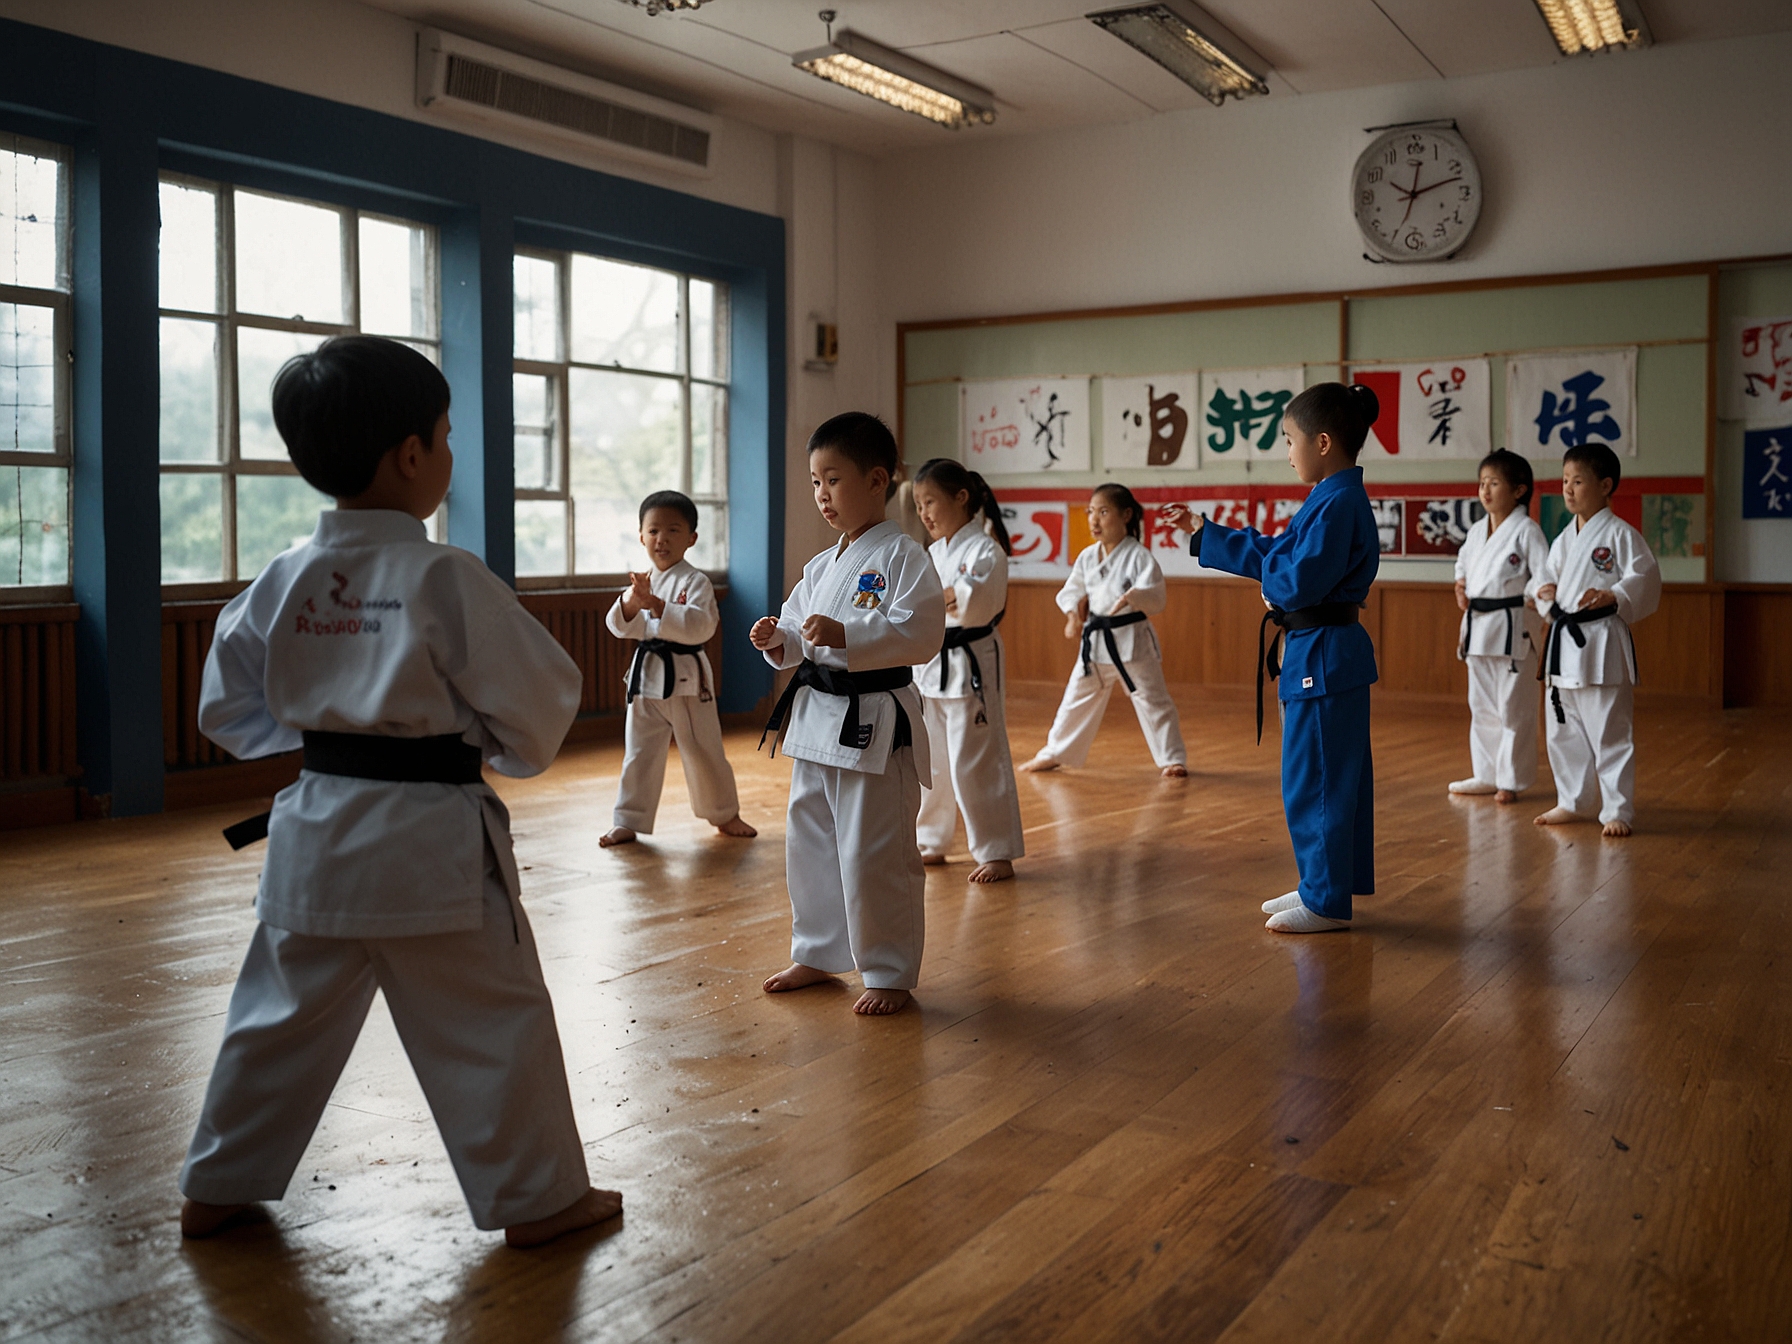 Young children participating in a fun and engaging taekwondo class at the Hong Kong Taekwondo Association. The scene highlights the disciplined yet enjoyable environment fostered by the black belt instructors.